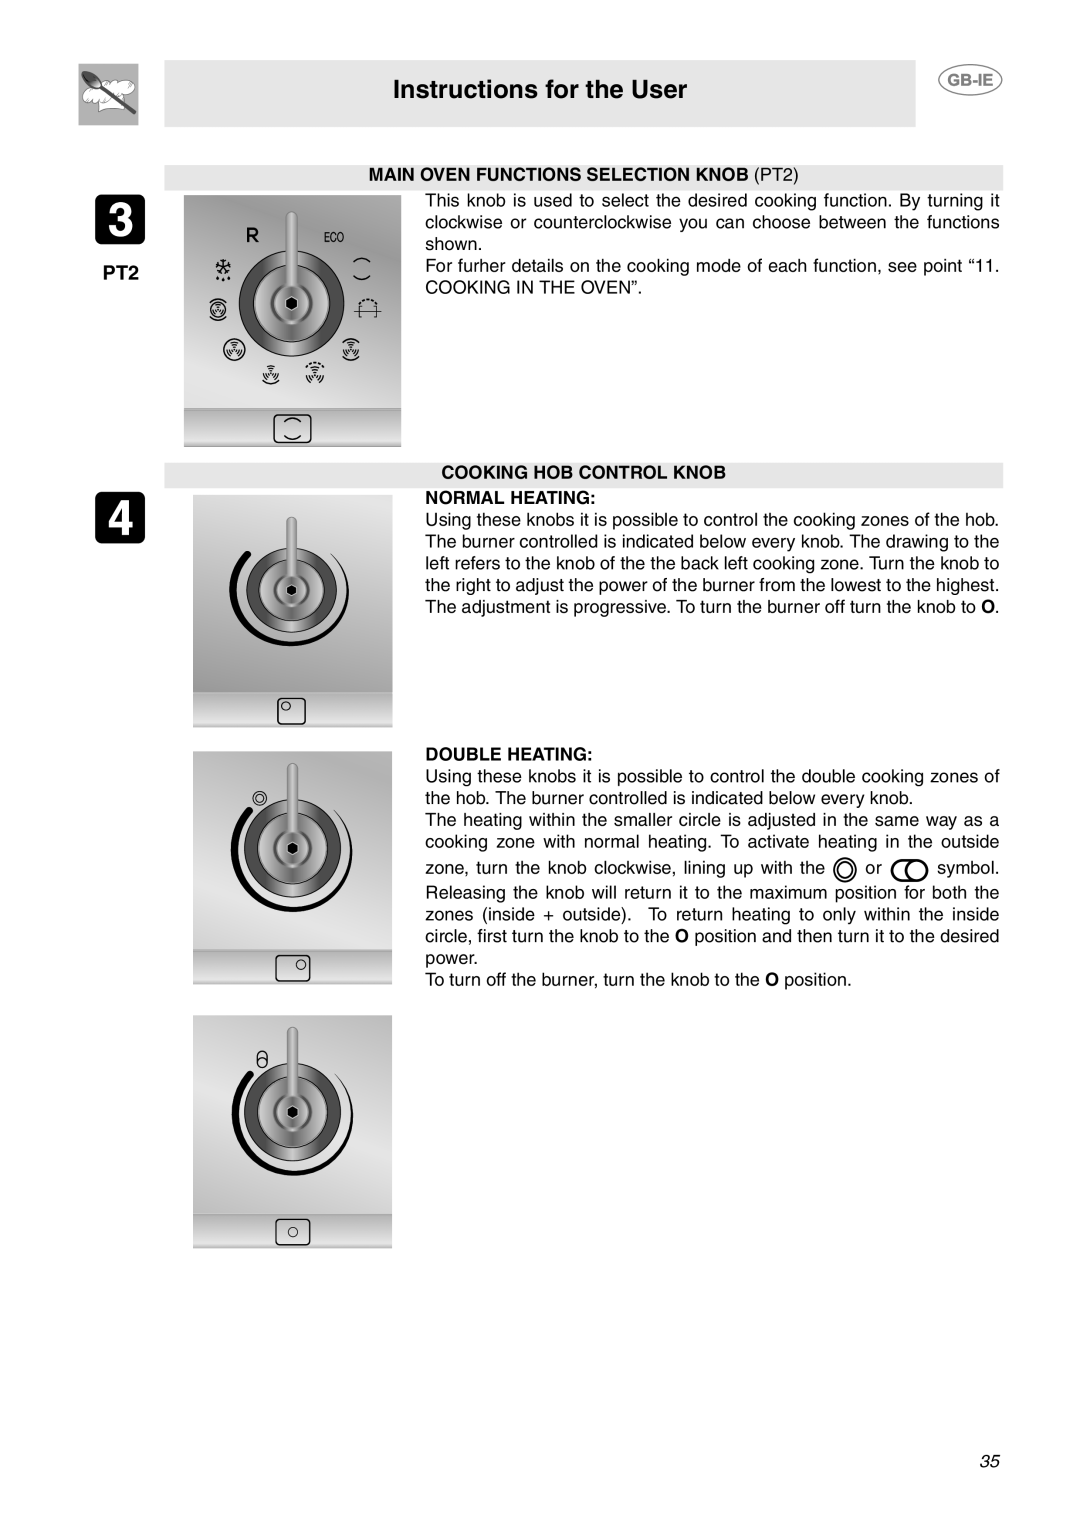 Smeg CE9CMX Instructions for the User, MAIN OVEN FUNCTIONS SELECTION KNOB PT2, Cooking Hob Control Knob Normal Heating 